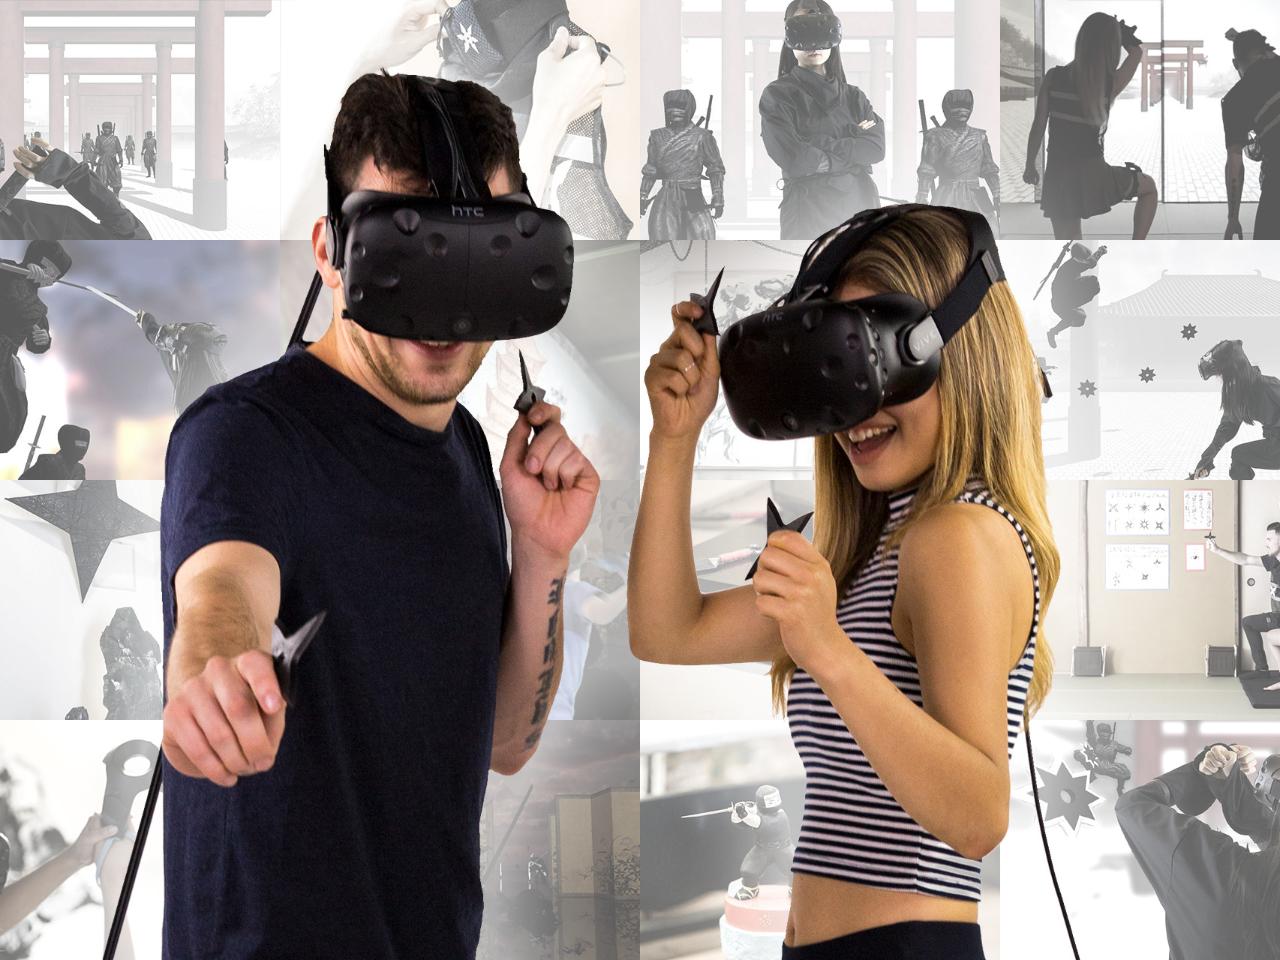 ＜Kyoto · VR experience! ＞The latest VR Ninja training experience in a famous shopping street! (Full Attraction Set Plan)